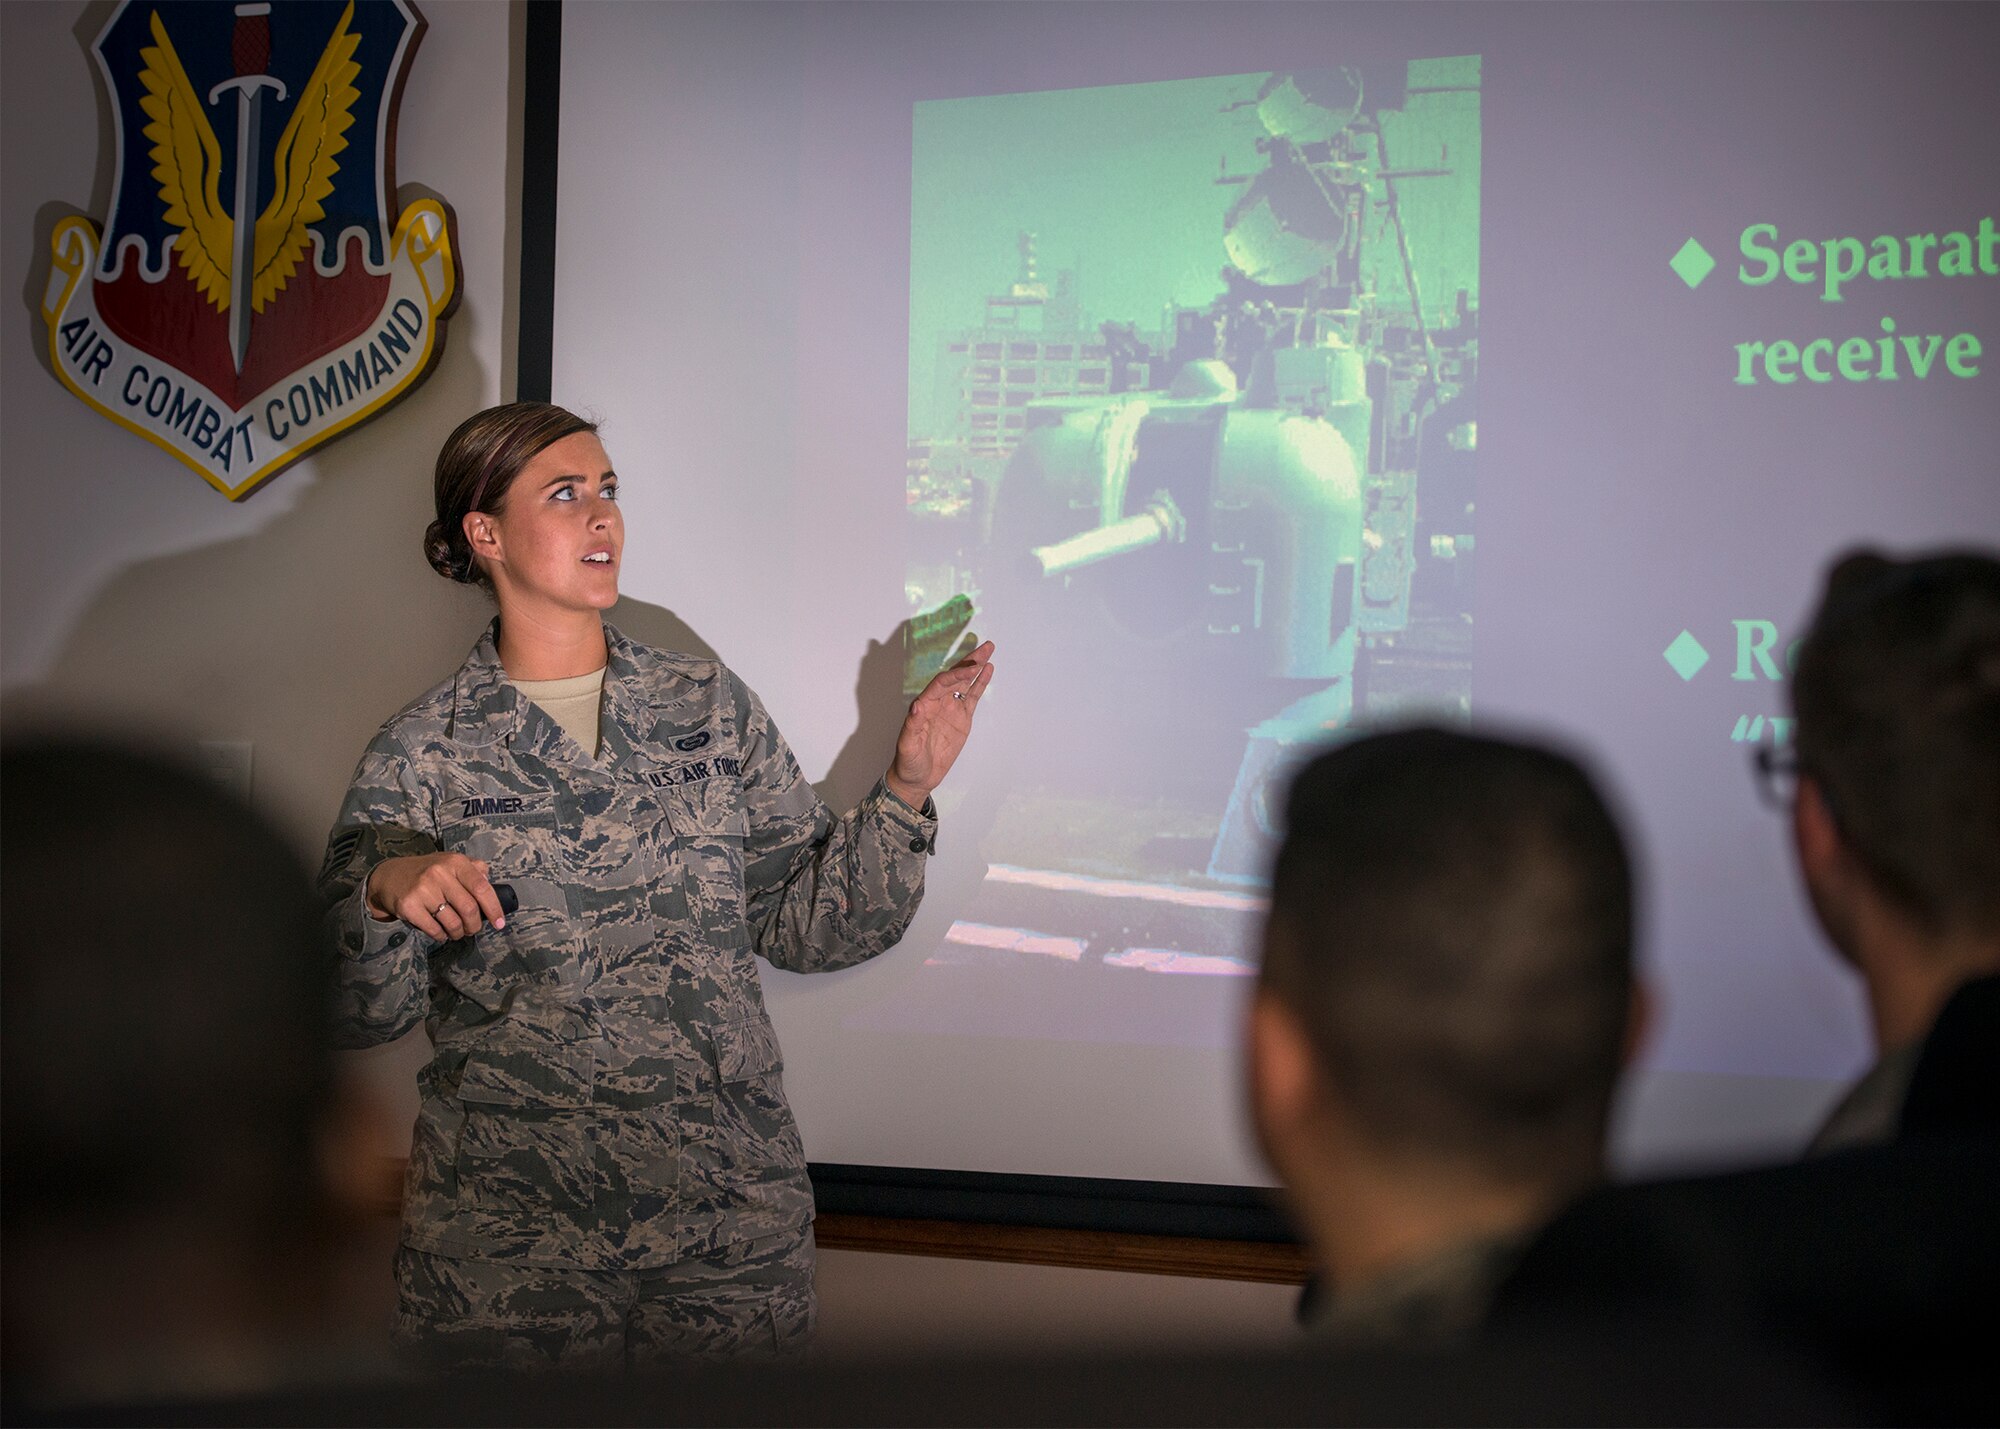 U.S. Air Force Staff Sgt. Jamie Zimmer, 347th Operations Support Squadron intelligence analyst, gives a briefing on radar systems and foreign threats, June 29, 2016, at Moody Air Force Base, Ga. Zimmer was credited with providing mission-critical intel support during exercises TRIDENT JUNCTURE and BOARS NEST as well as two 23d Wing combat search and rescue exercises. (U.S. Air Force photo by Senior Airman Ryan Callaghan)